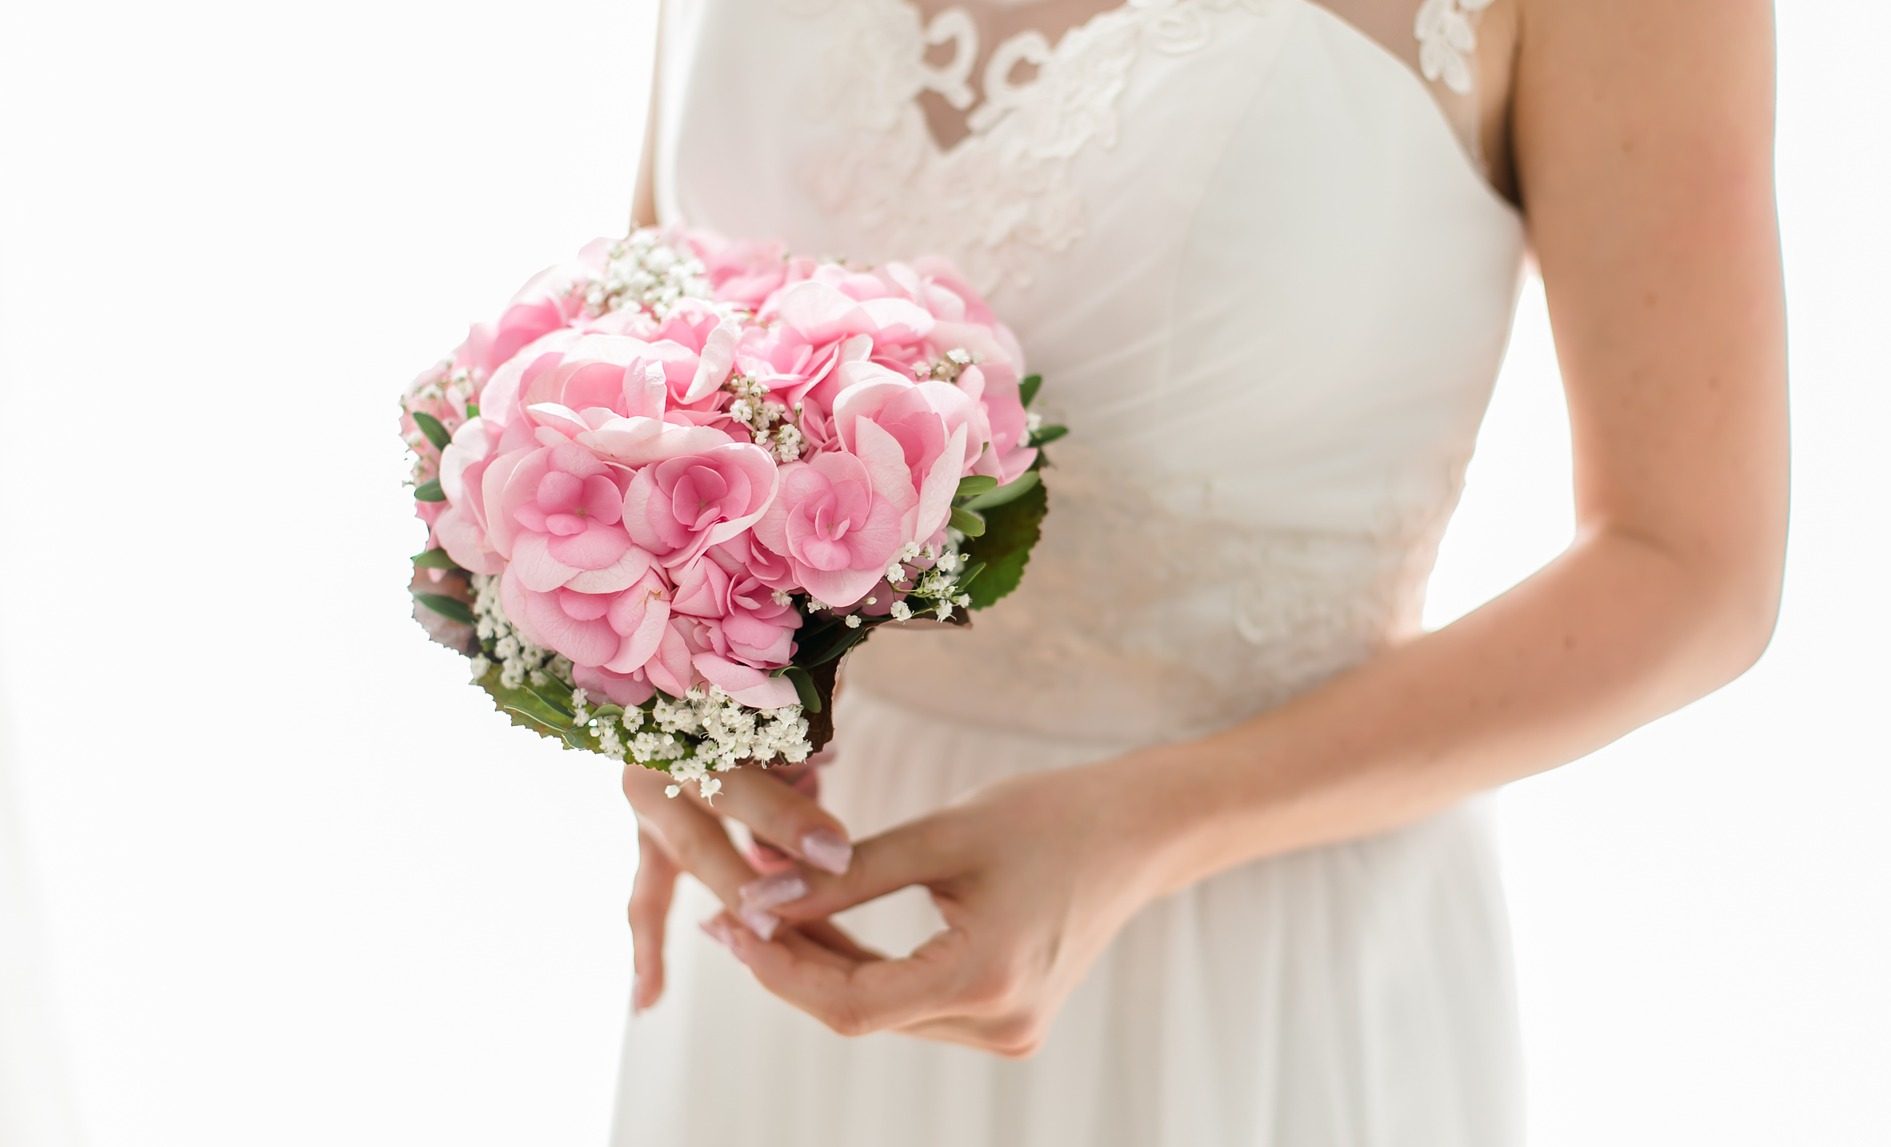 8 Tips For Choosing & Buying Your Wedding Flowers